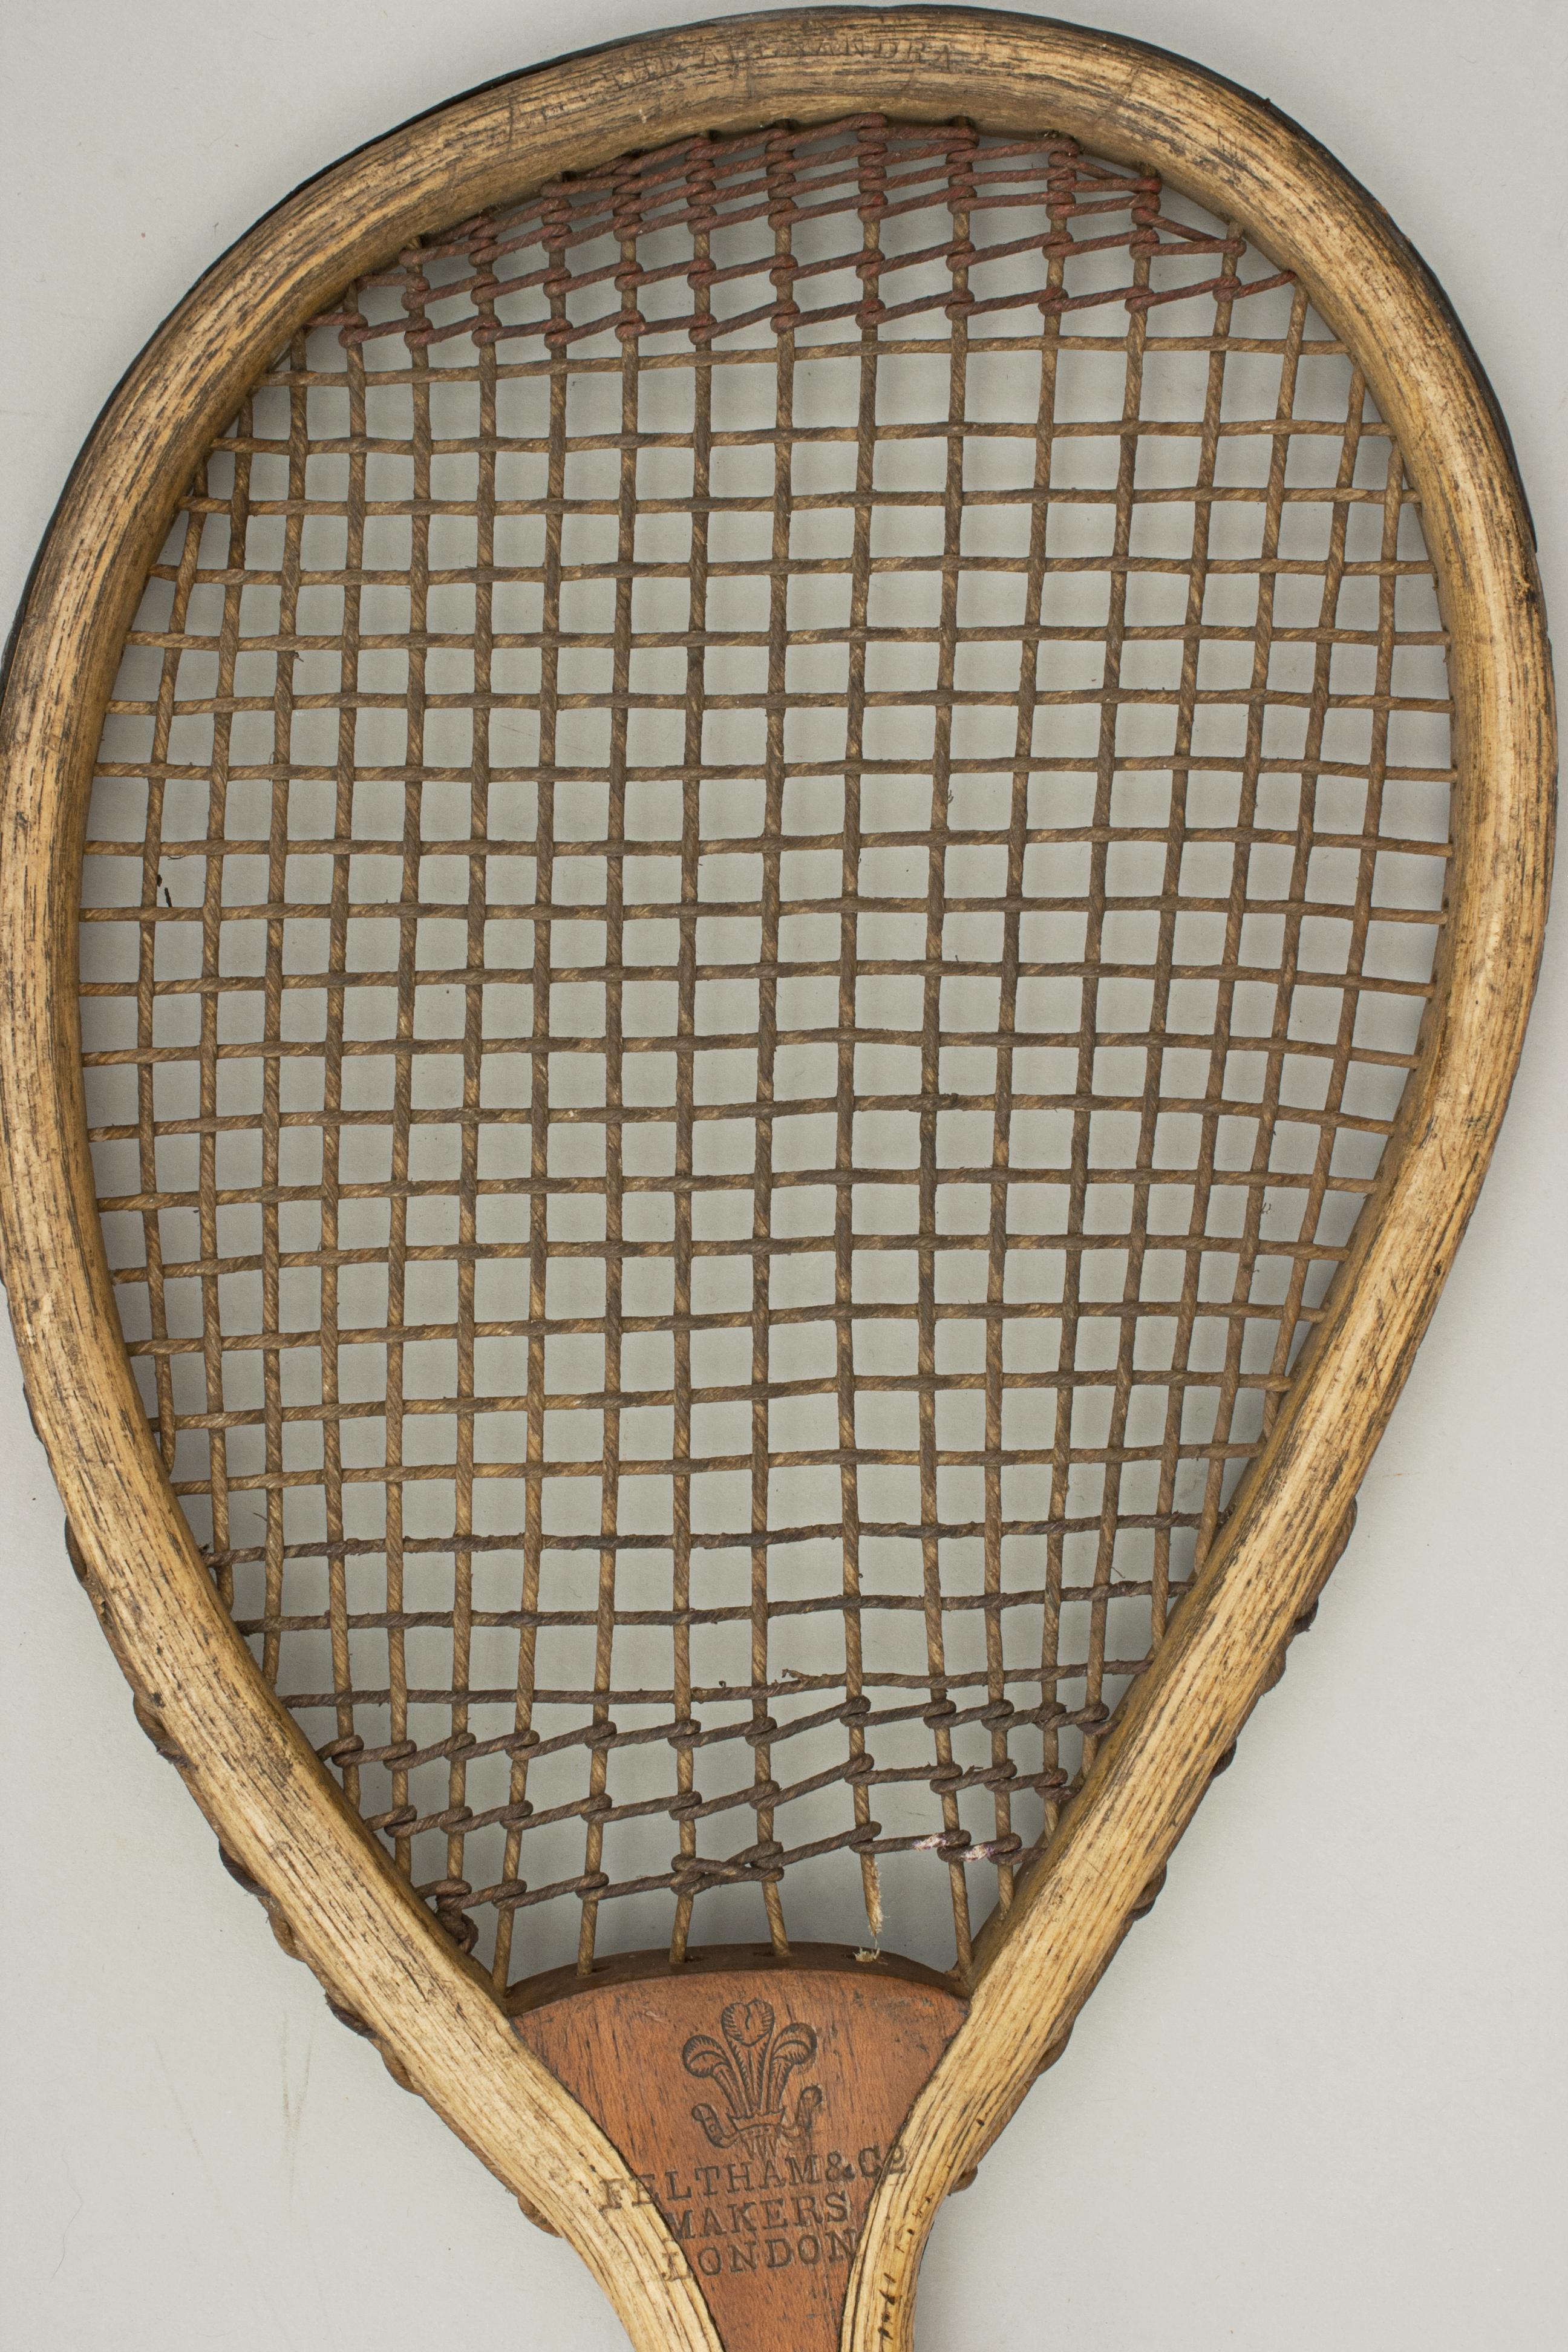 English Feltham Lawn Tennis Racket, Lop Sided, Tear Drop Shape, Antique and Very Rare